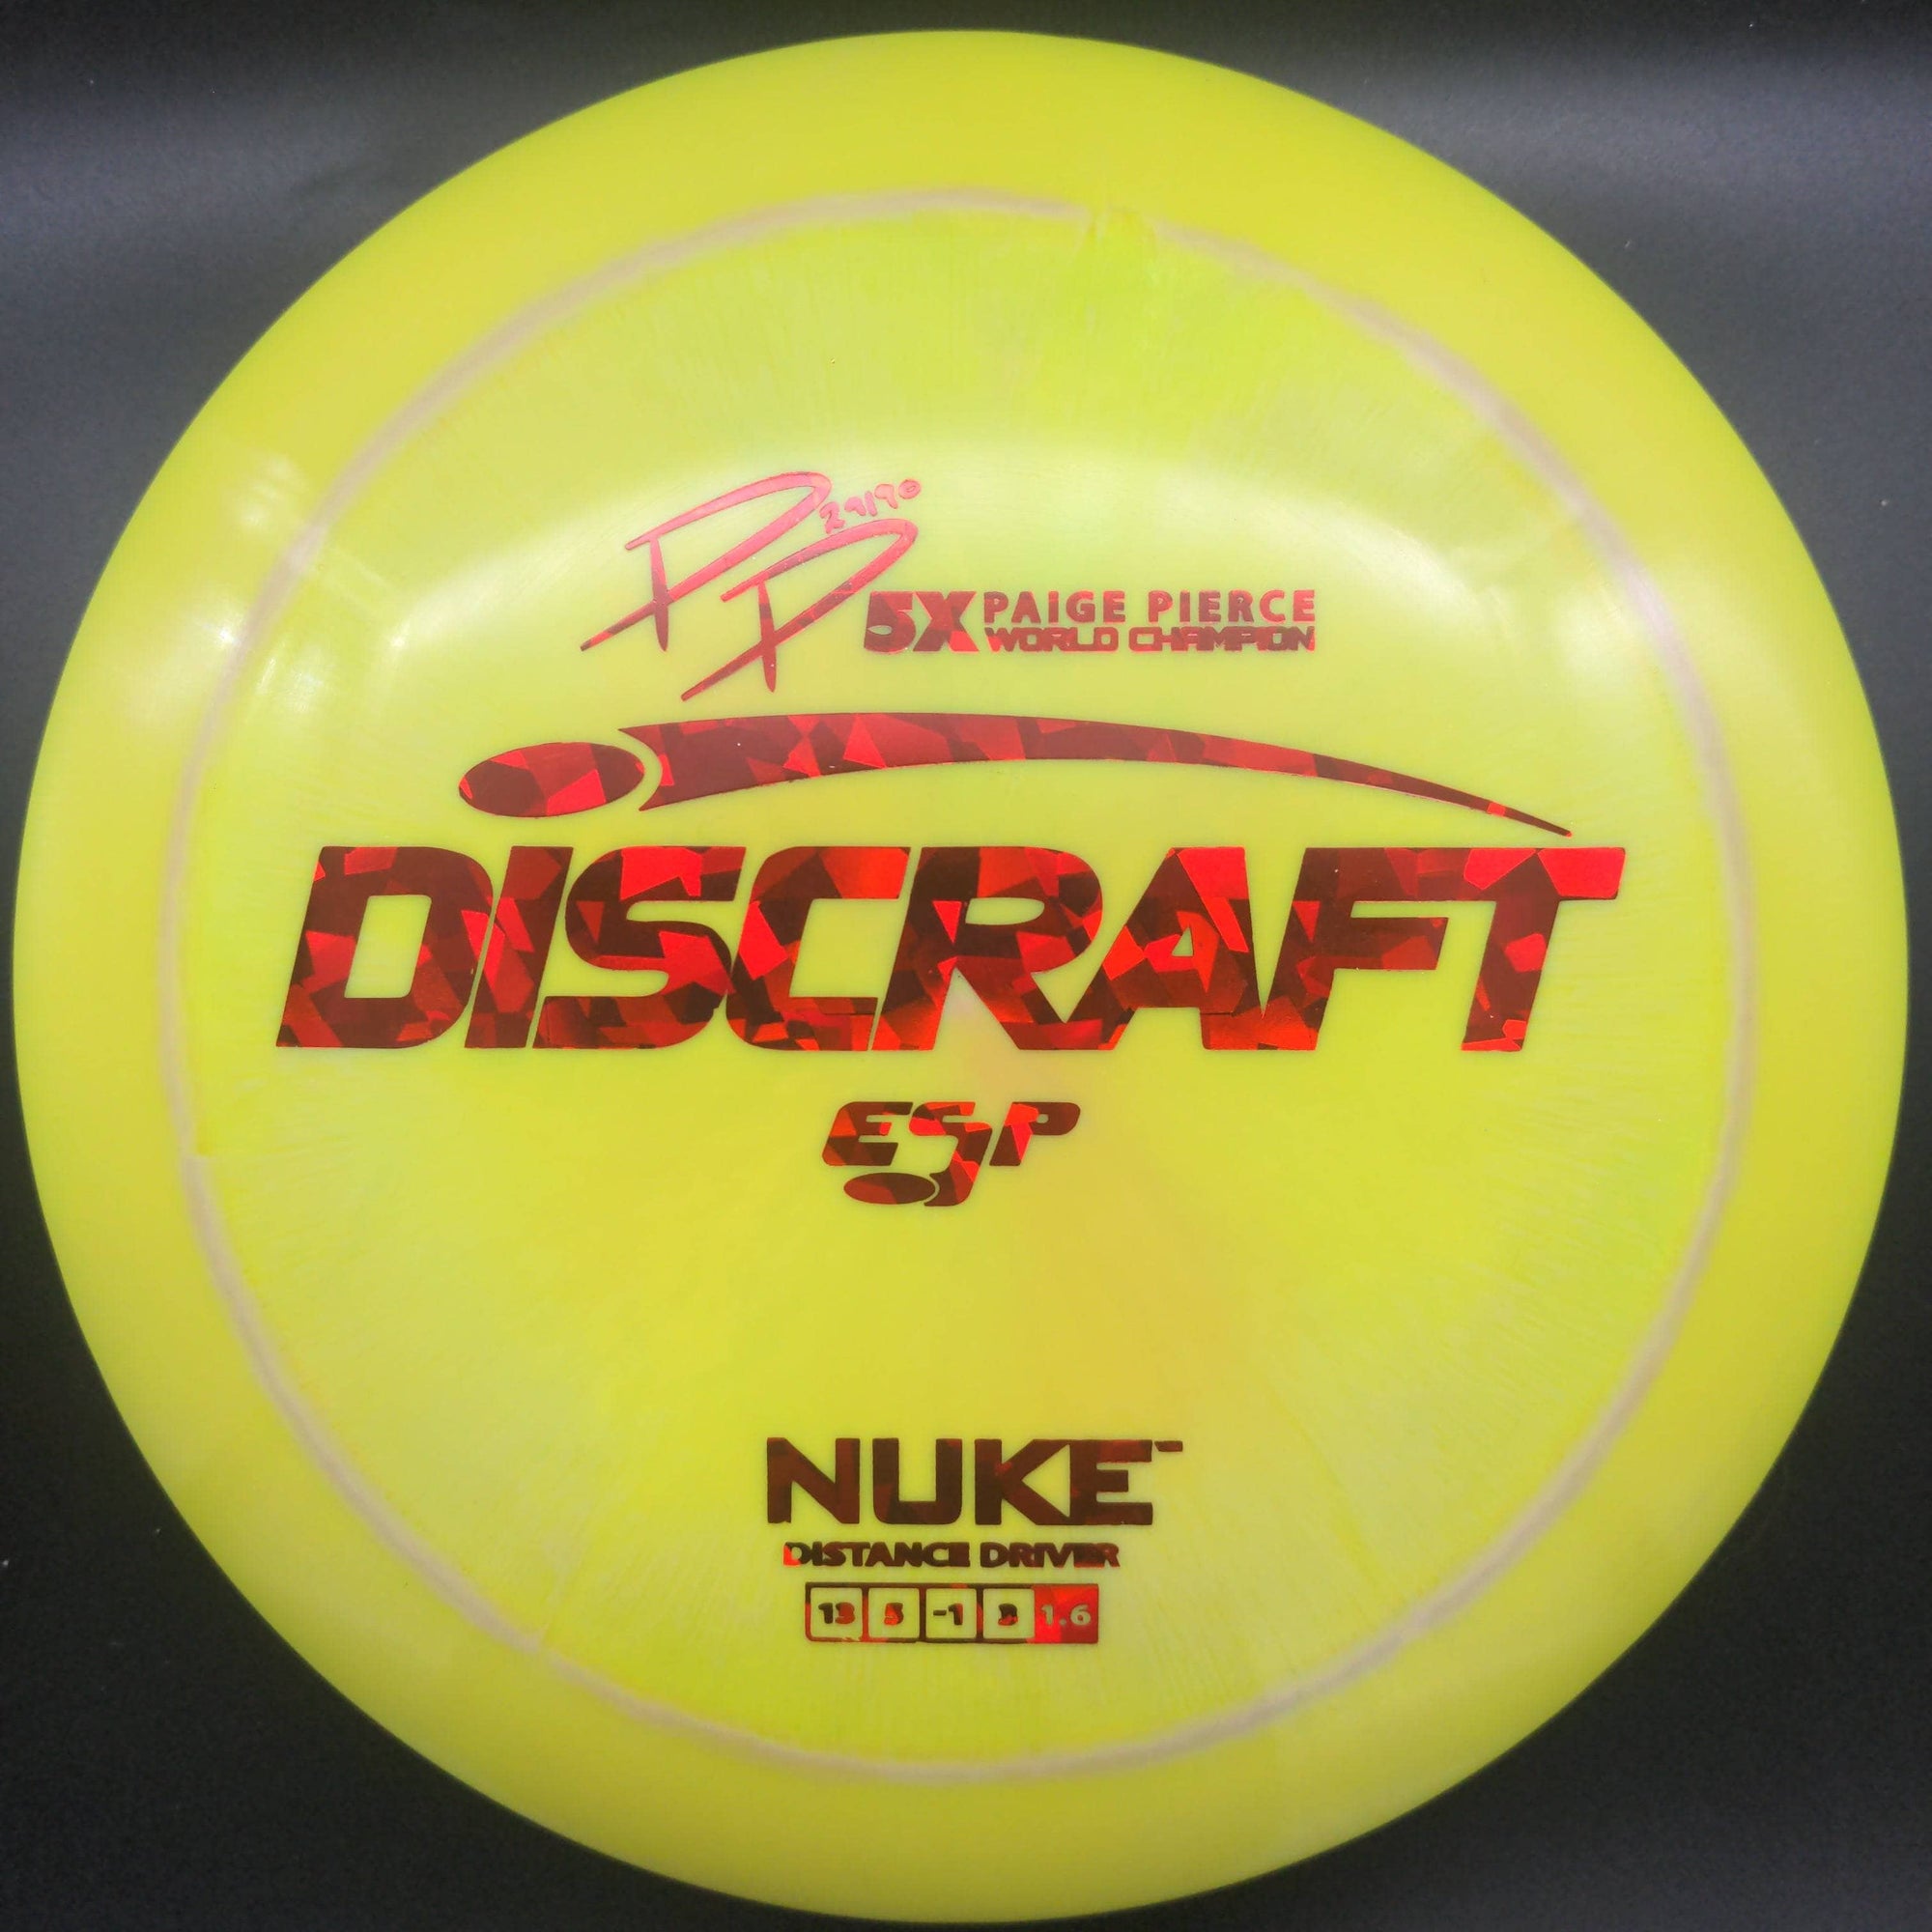 Discraft Distance Driver Yellow Red Shatter Stamp 174g Nuke ESP Paige Pierce